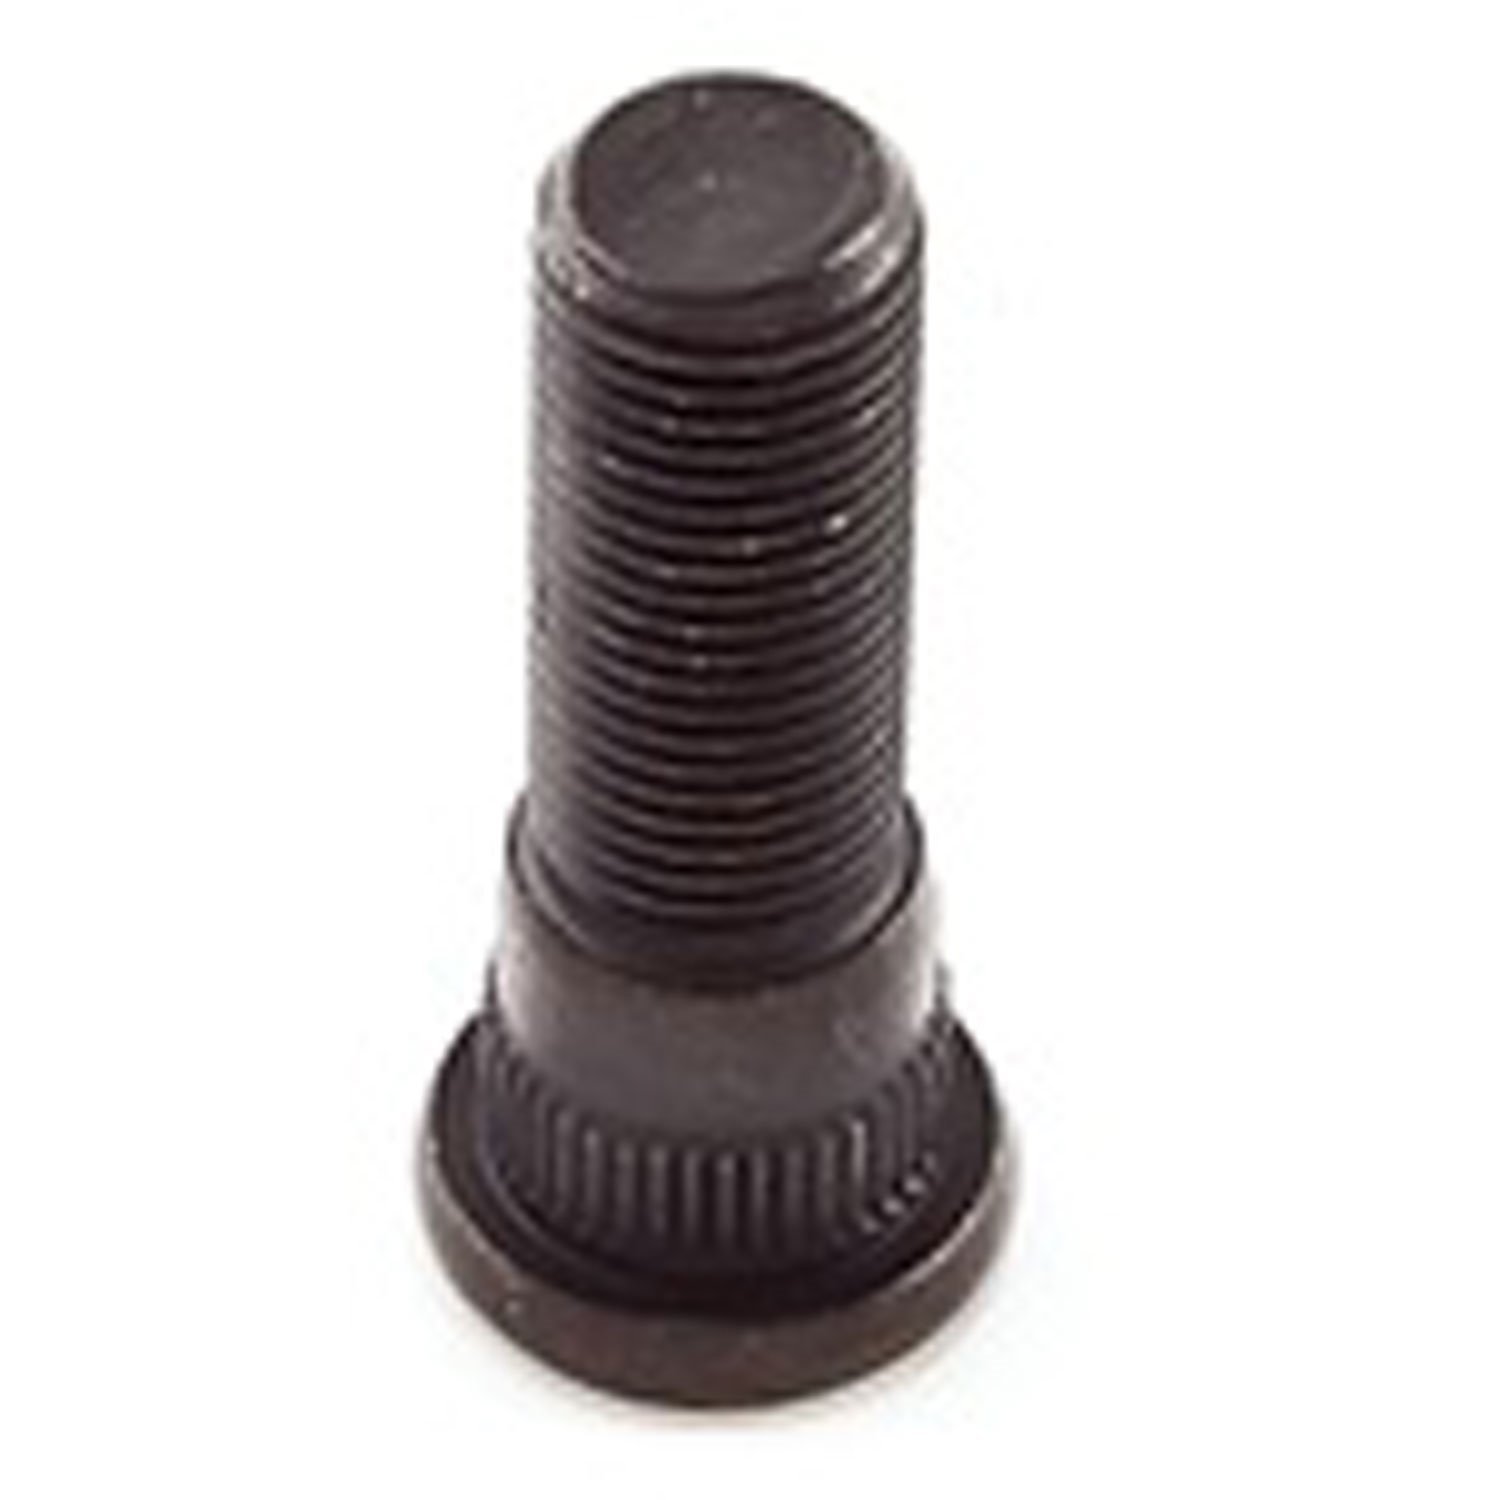 Replacement wheel stud from Omix-ADA, Fits 94-00 Jeep Cherokee XJ 94-00 Wrangler and 94-98 Jeep